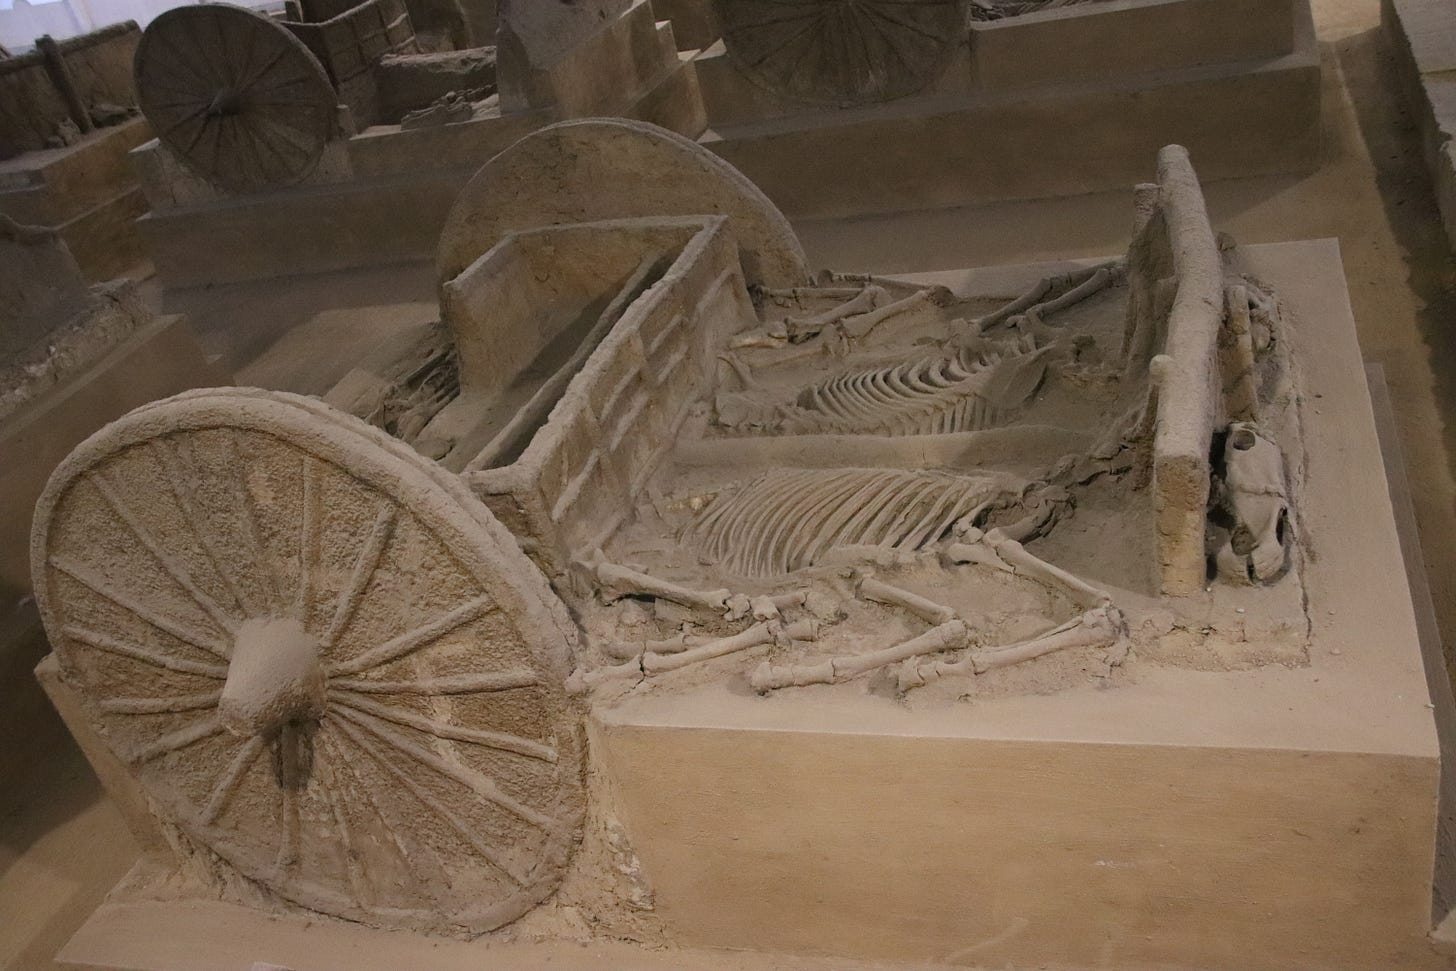 File:Shang Chariot Burial 01.jpg - Wikimedia Commons